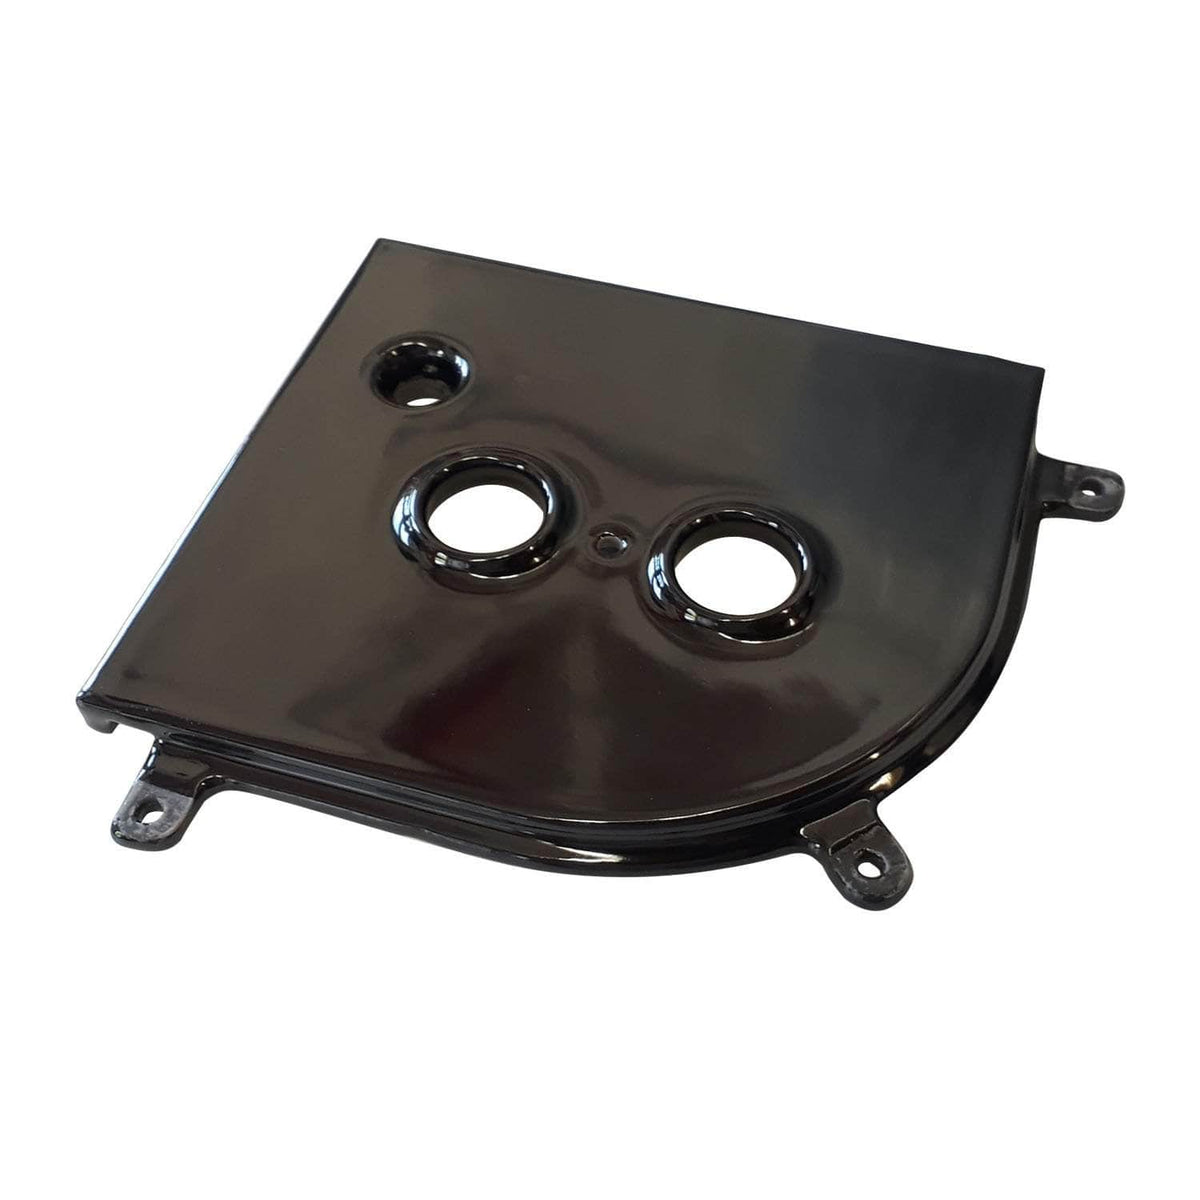 Hob Corner Plates, with or without boiler holes, for use with &#39;Standard&#39; Aga range cookers Hob corner plate with boiler holes